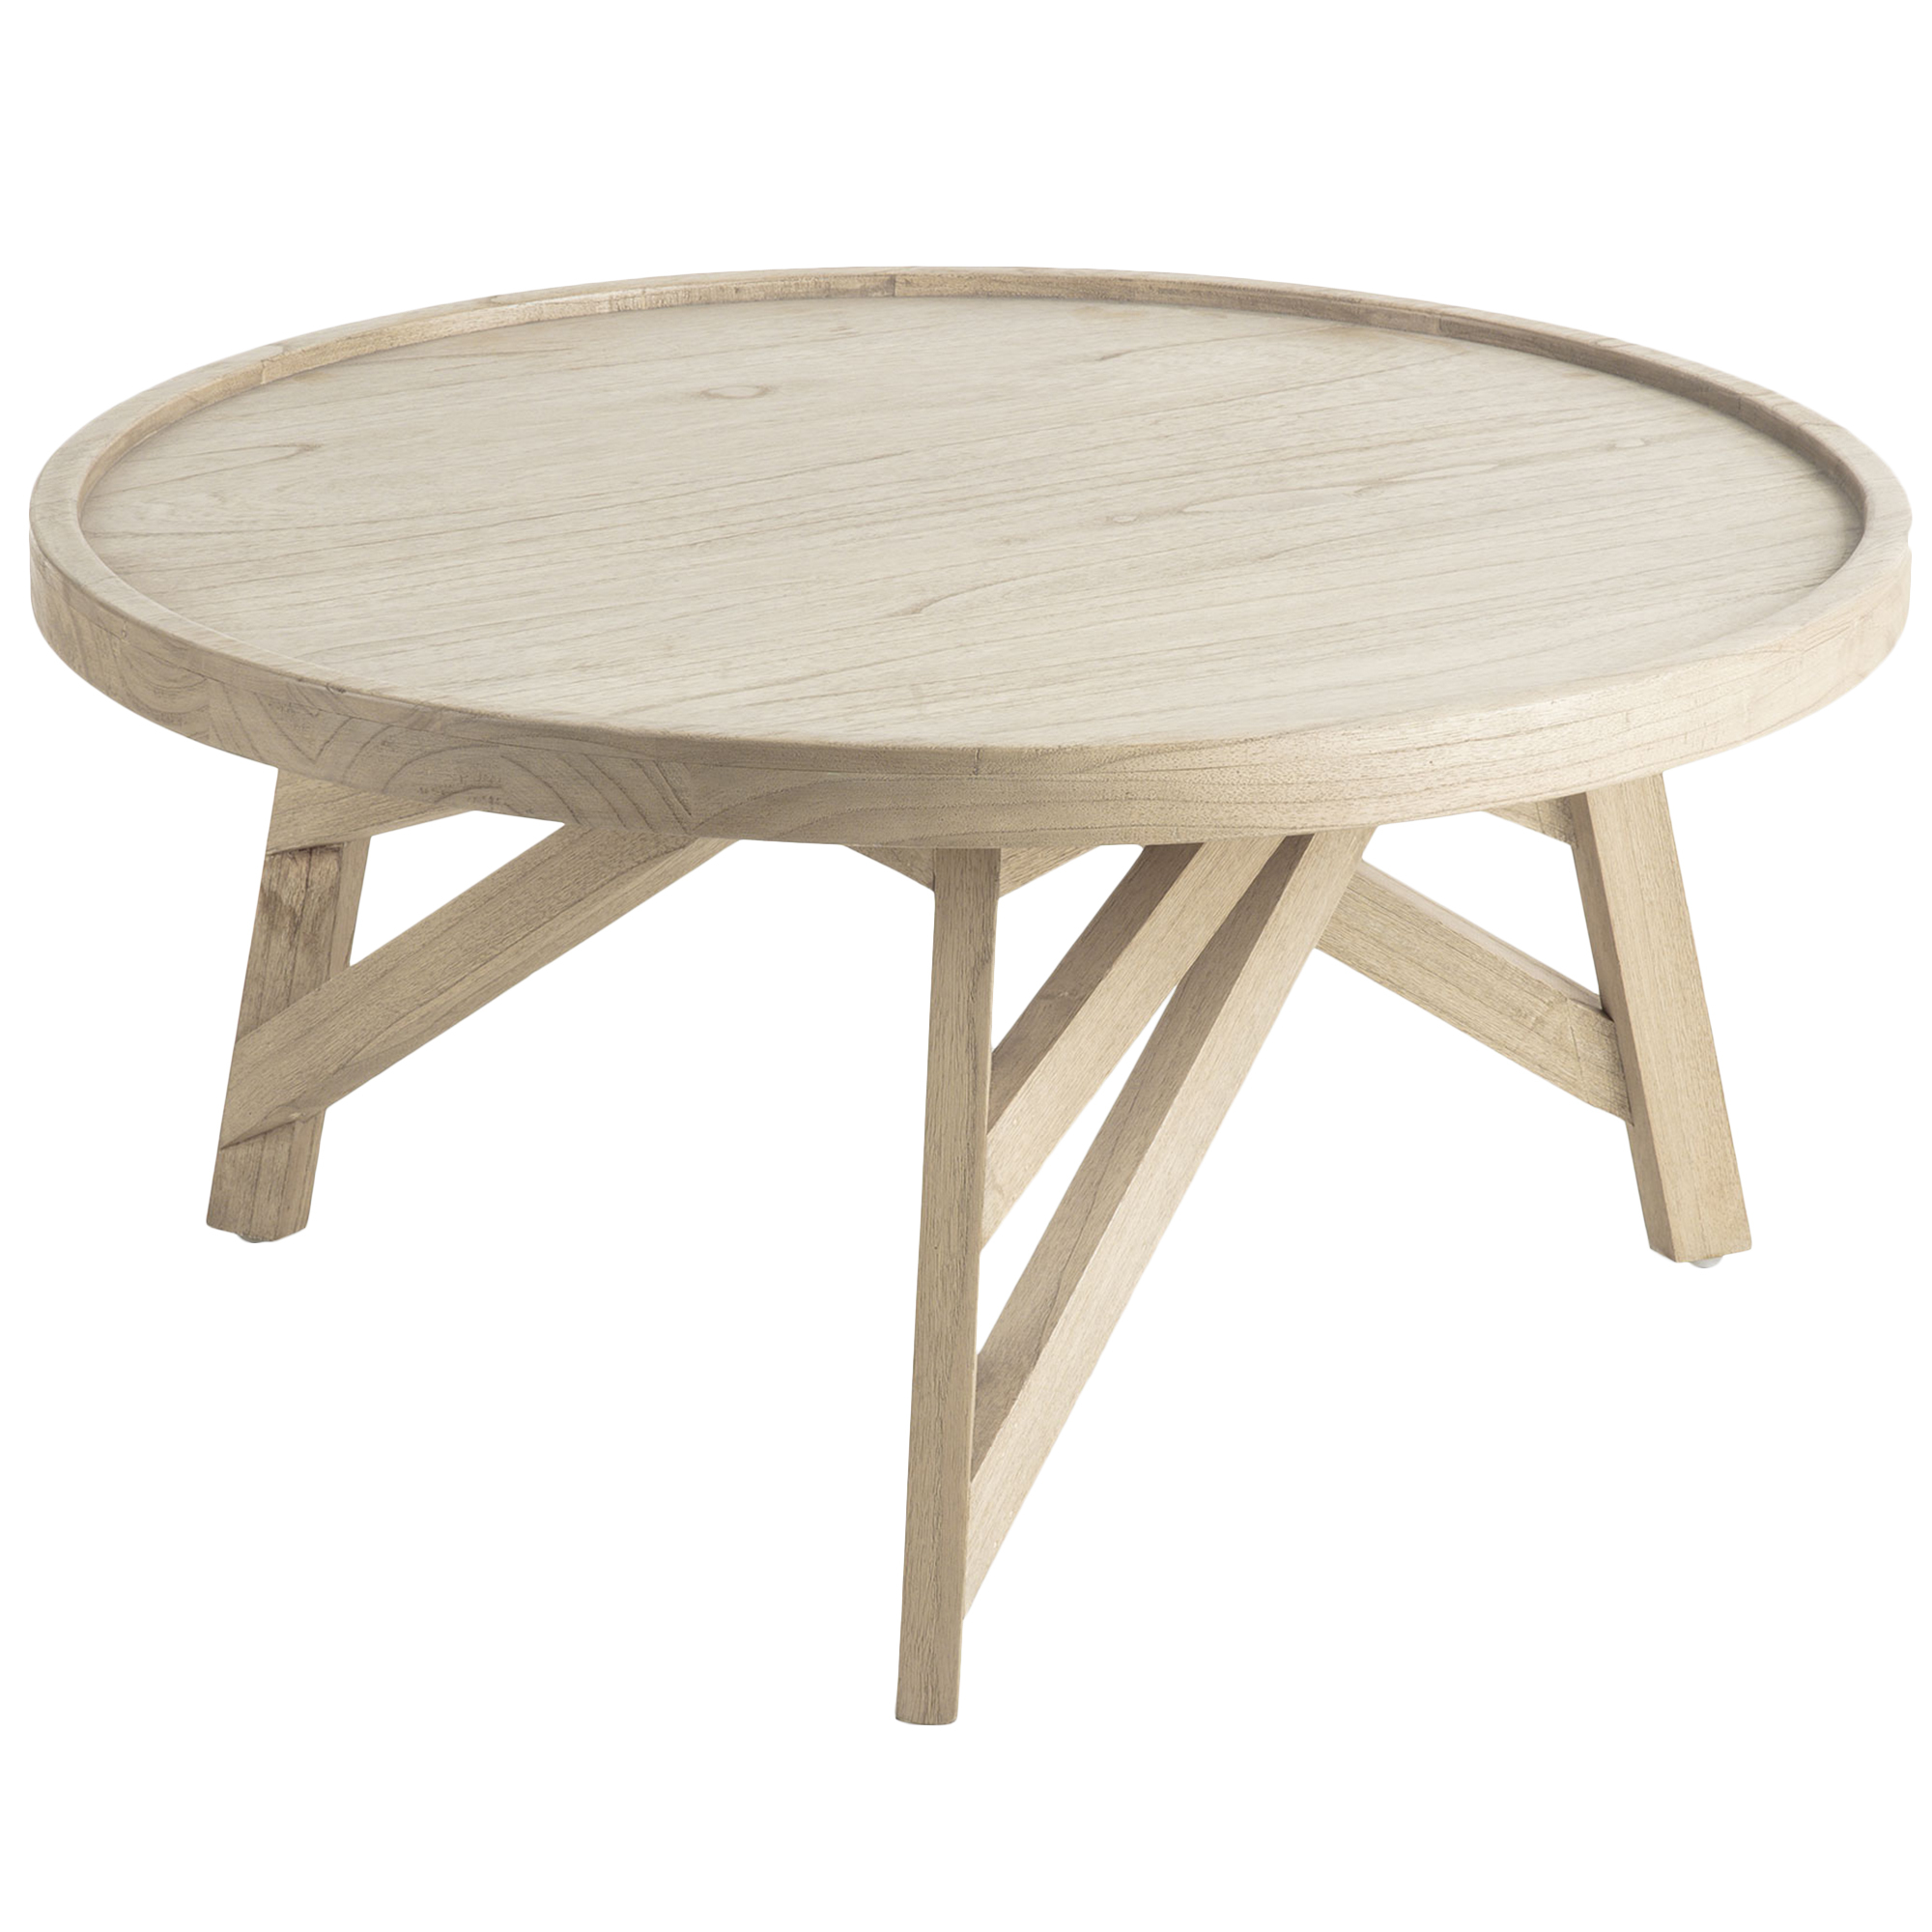 Linea Furniture Hadley Round Wood Coffee Table Reviews Temple Webster